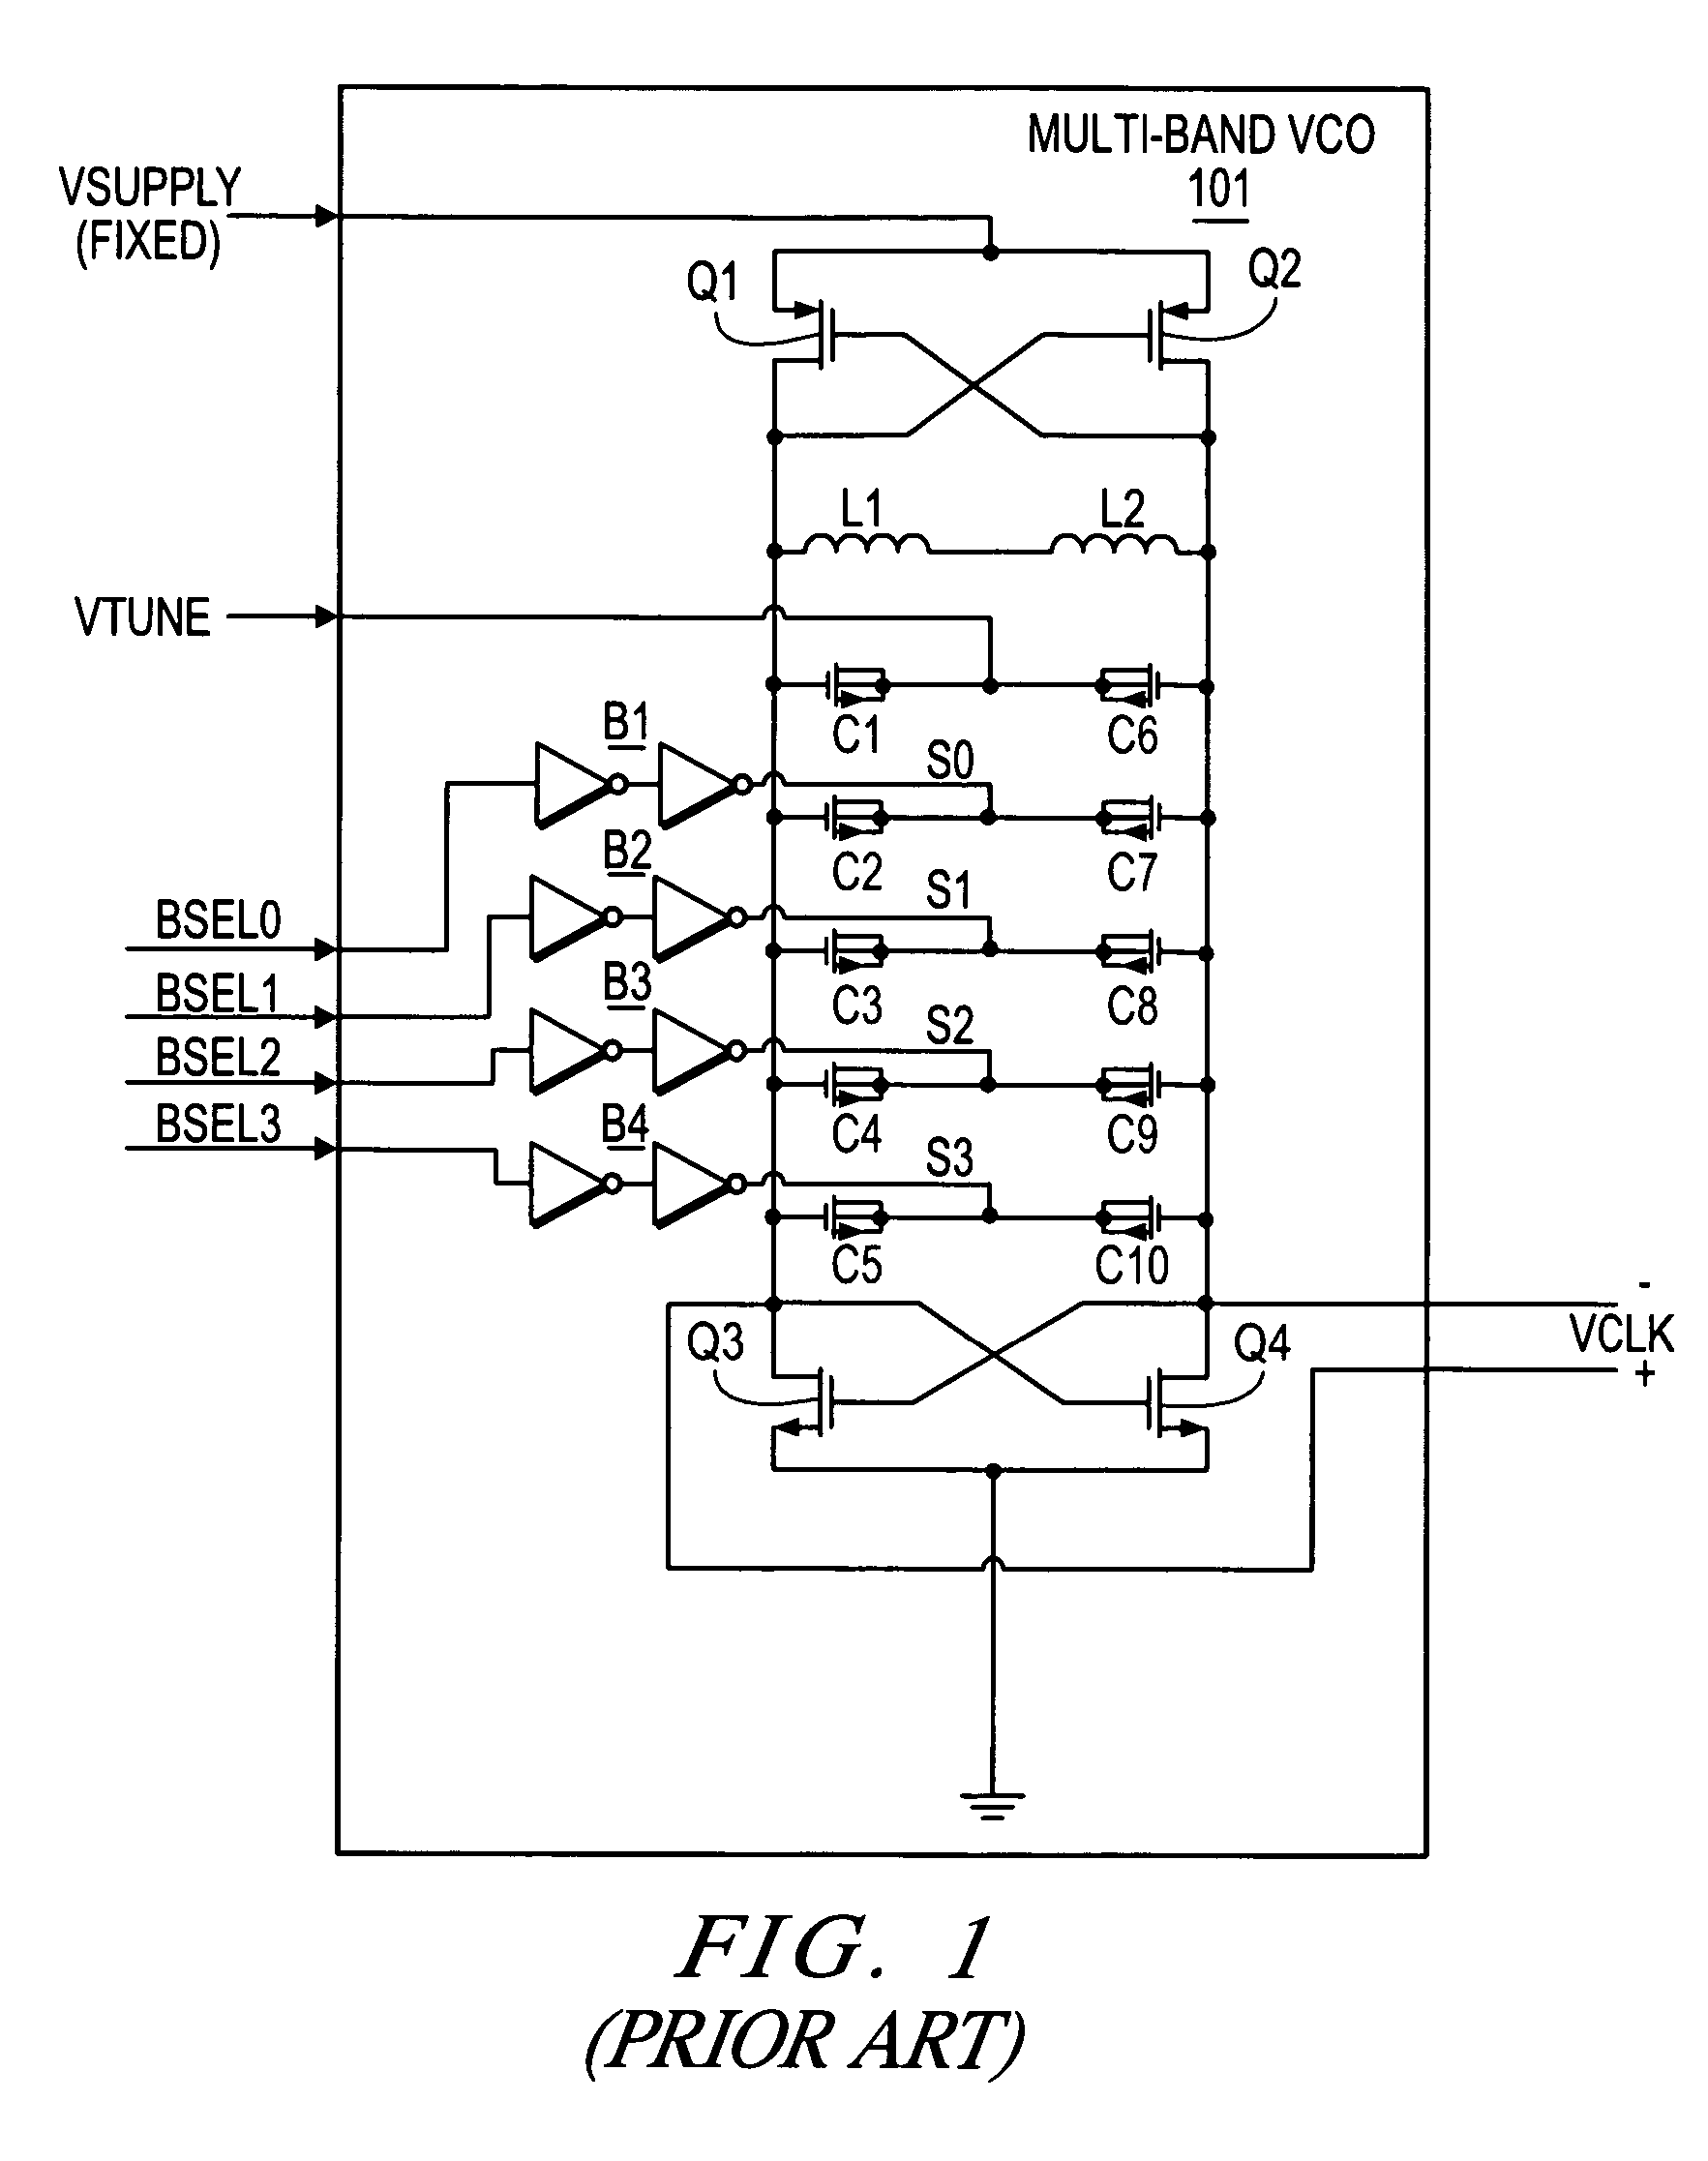 Voltage controlled oscillator with gain control